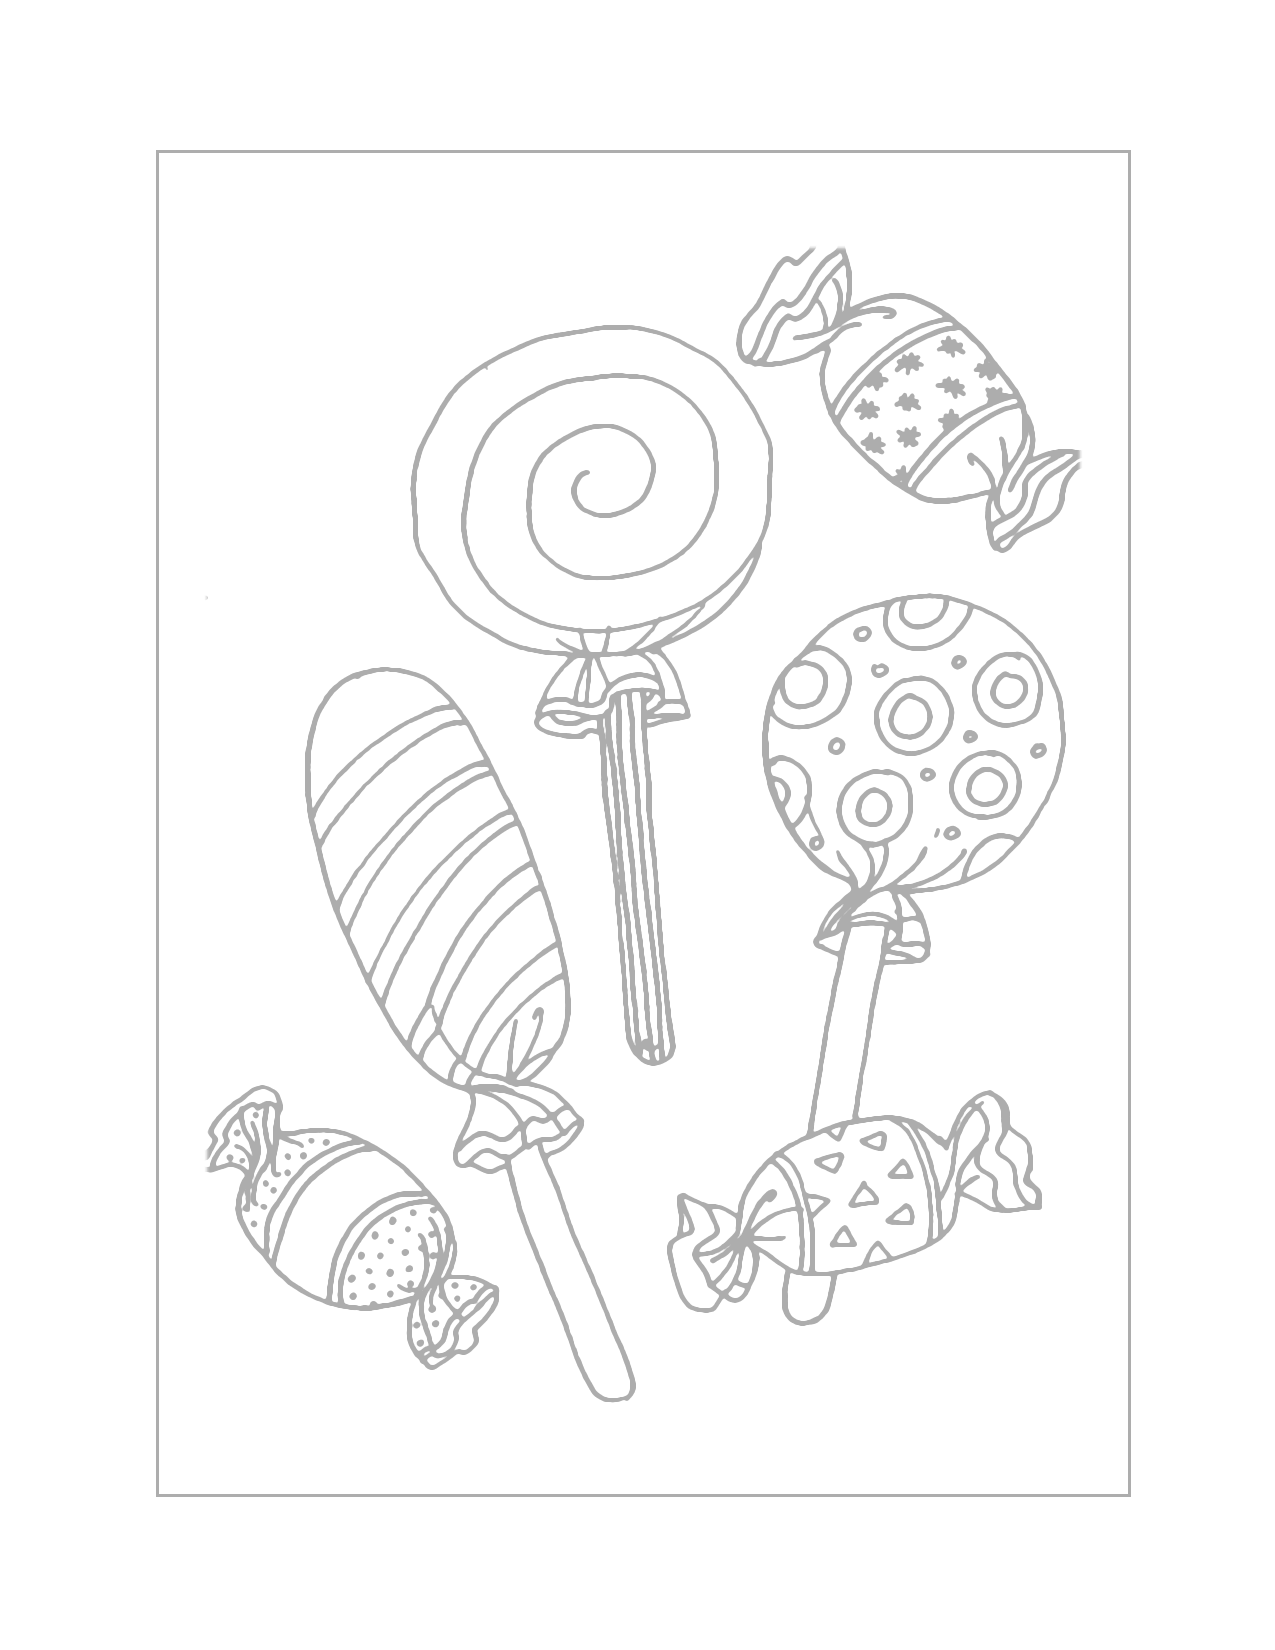 Assorted Candy Tracing Coloring Sheet